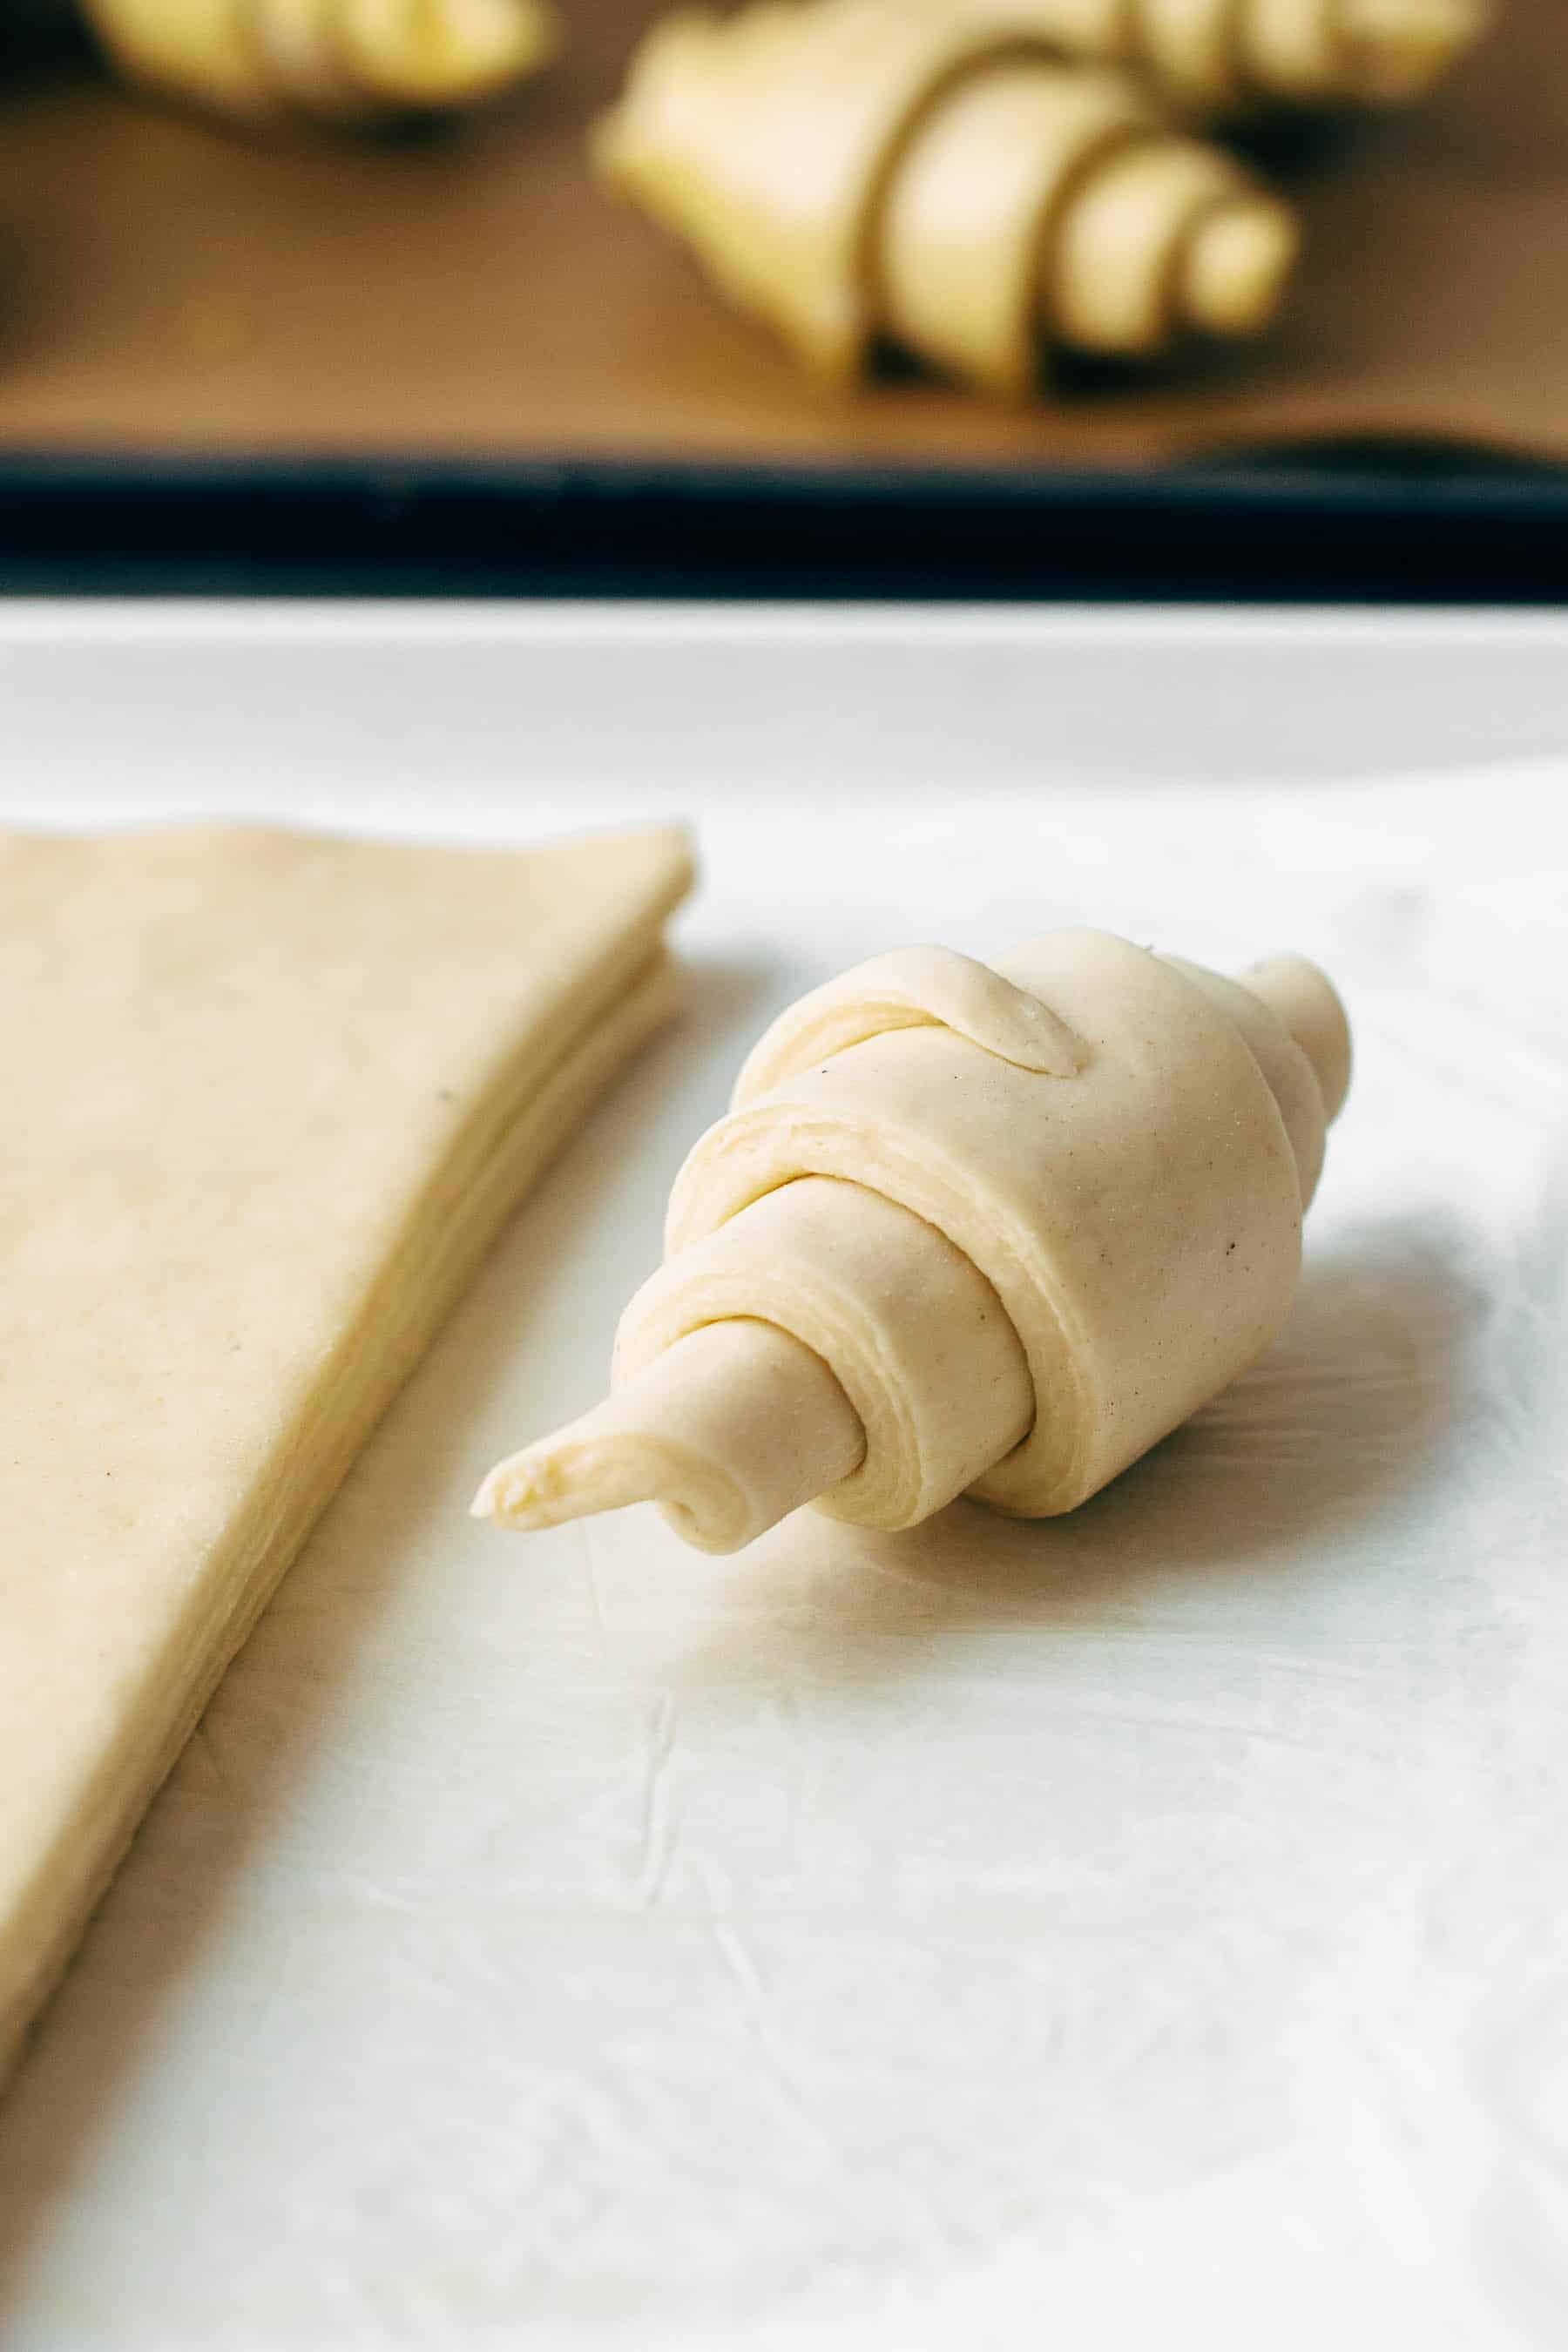 Close up of a rolled up unbaked croissant on a bright surface